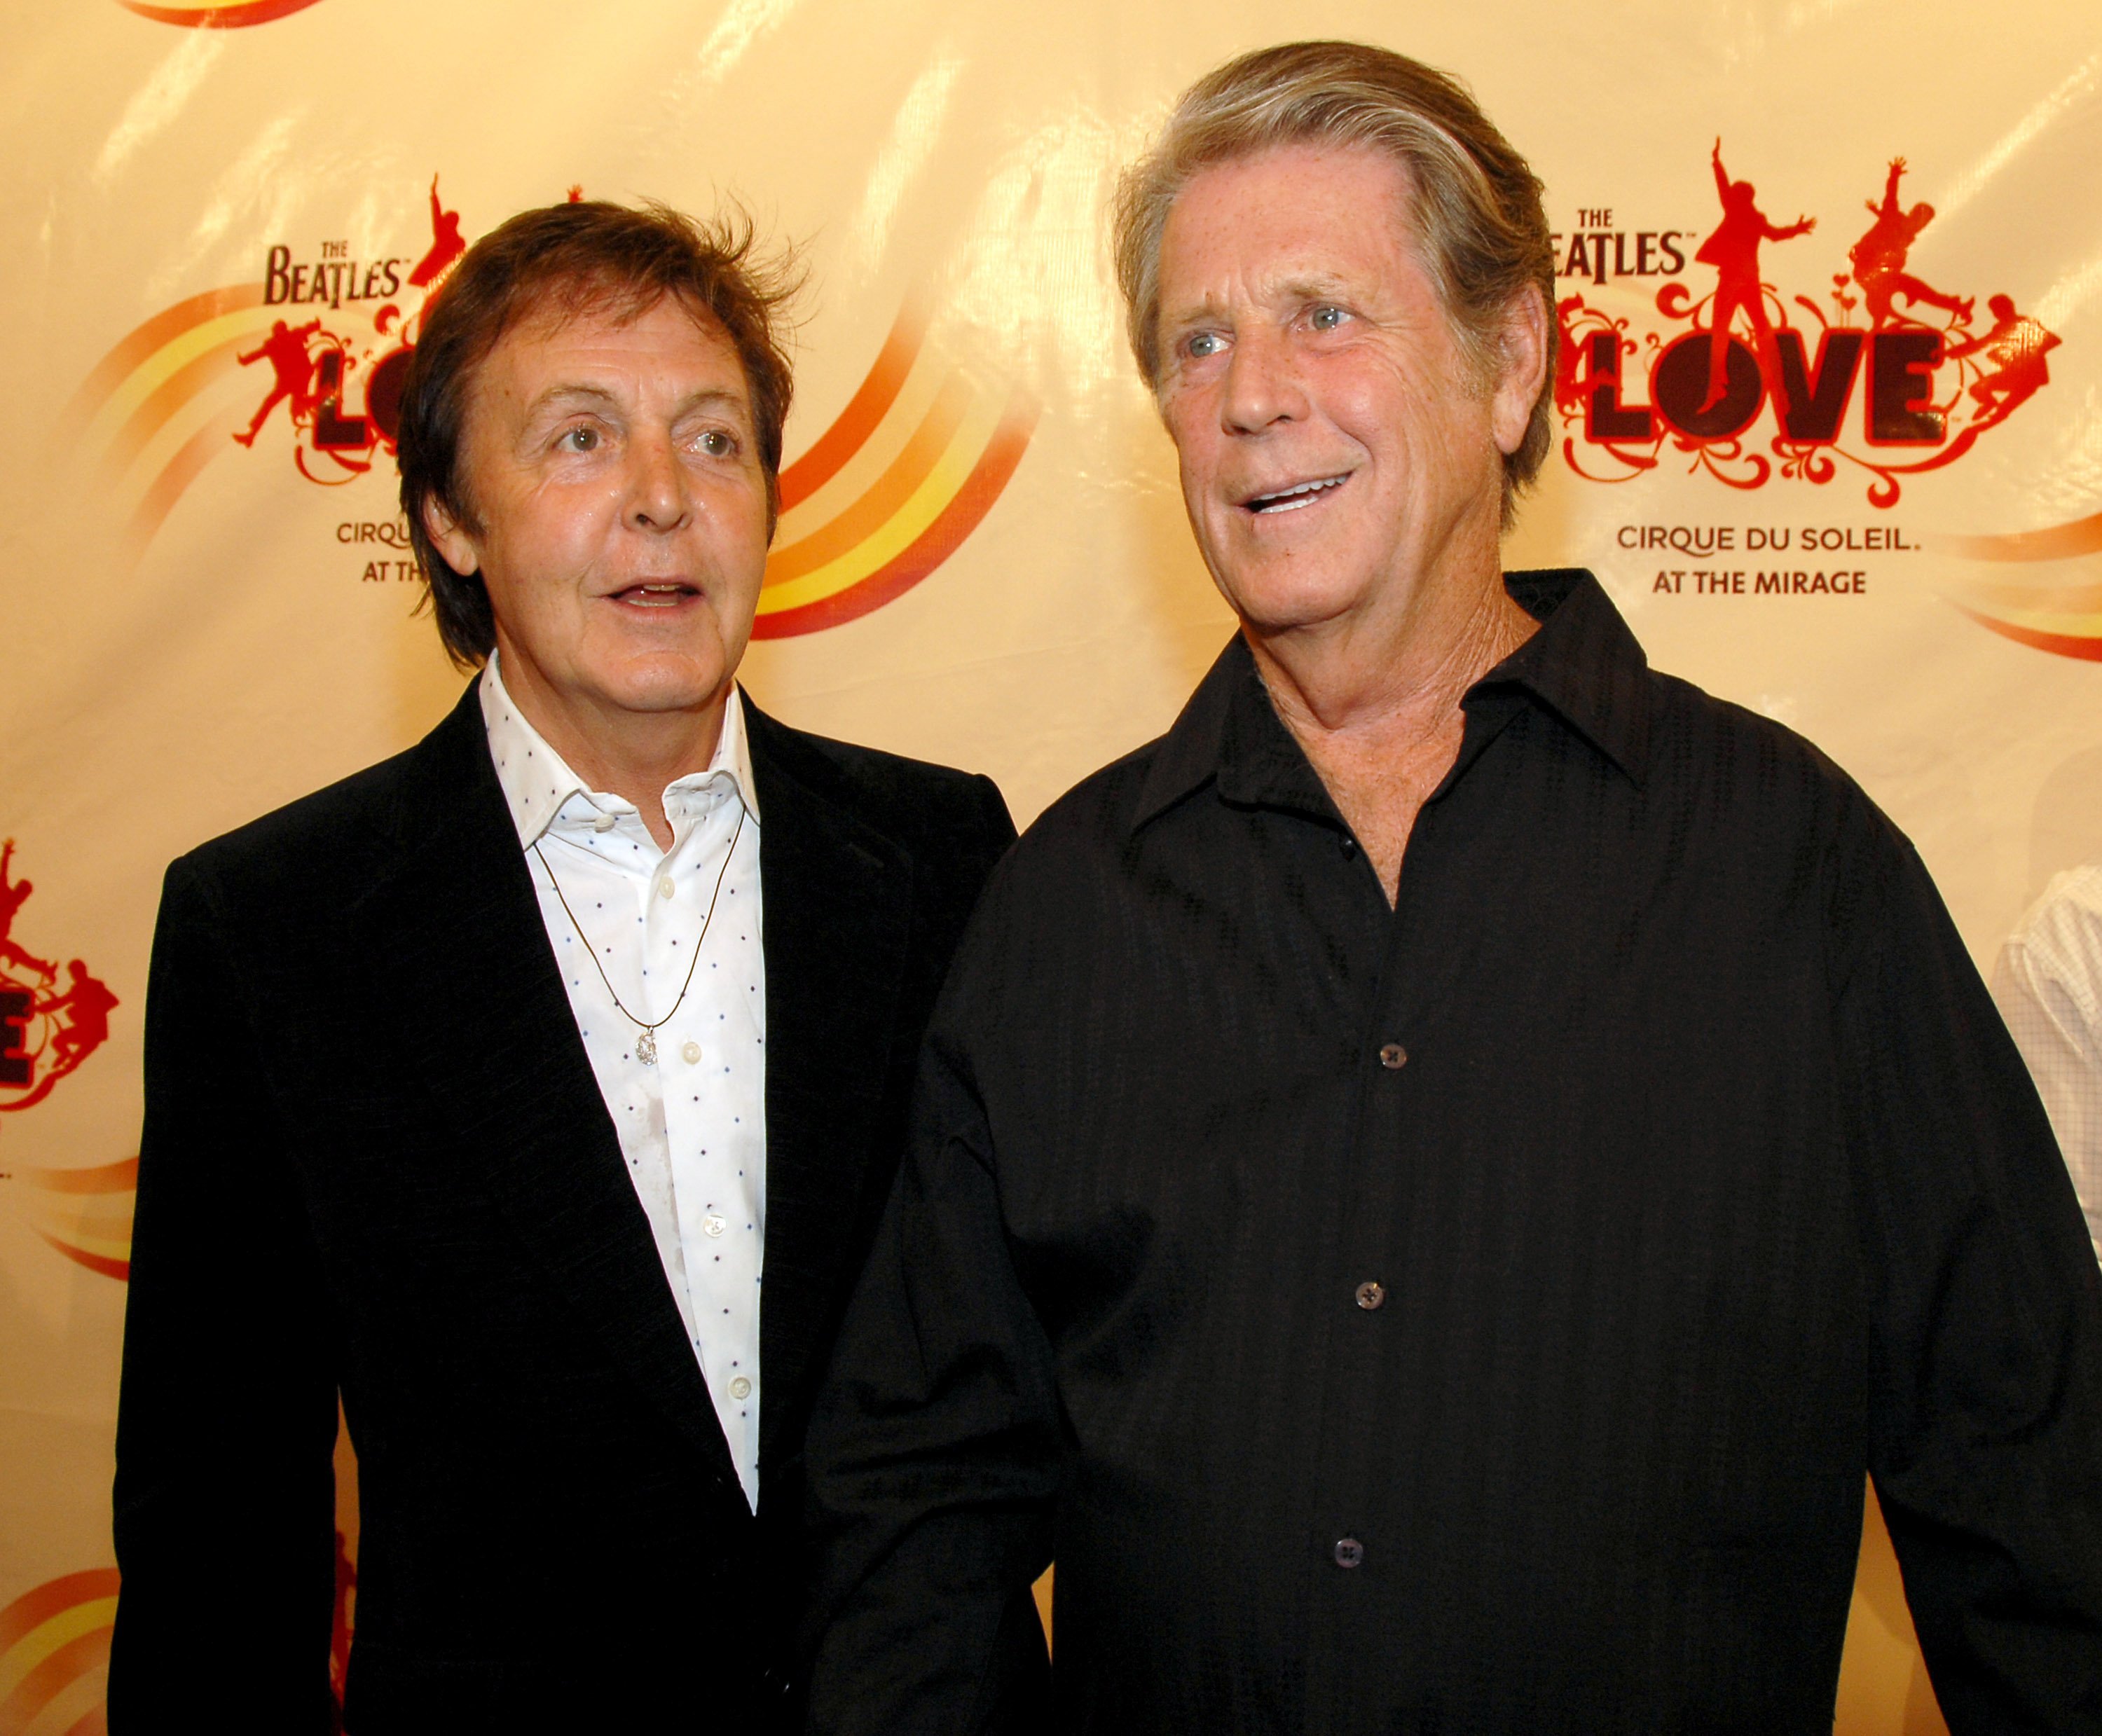 Sir Paul McCartney and Brian Wilson during 'LOVE': Cirque du Soleil Celebrates the Musical Legacy of The Beatles